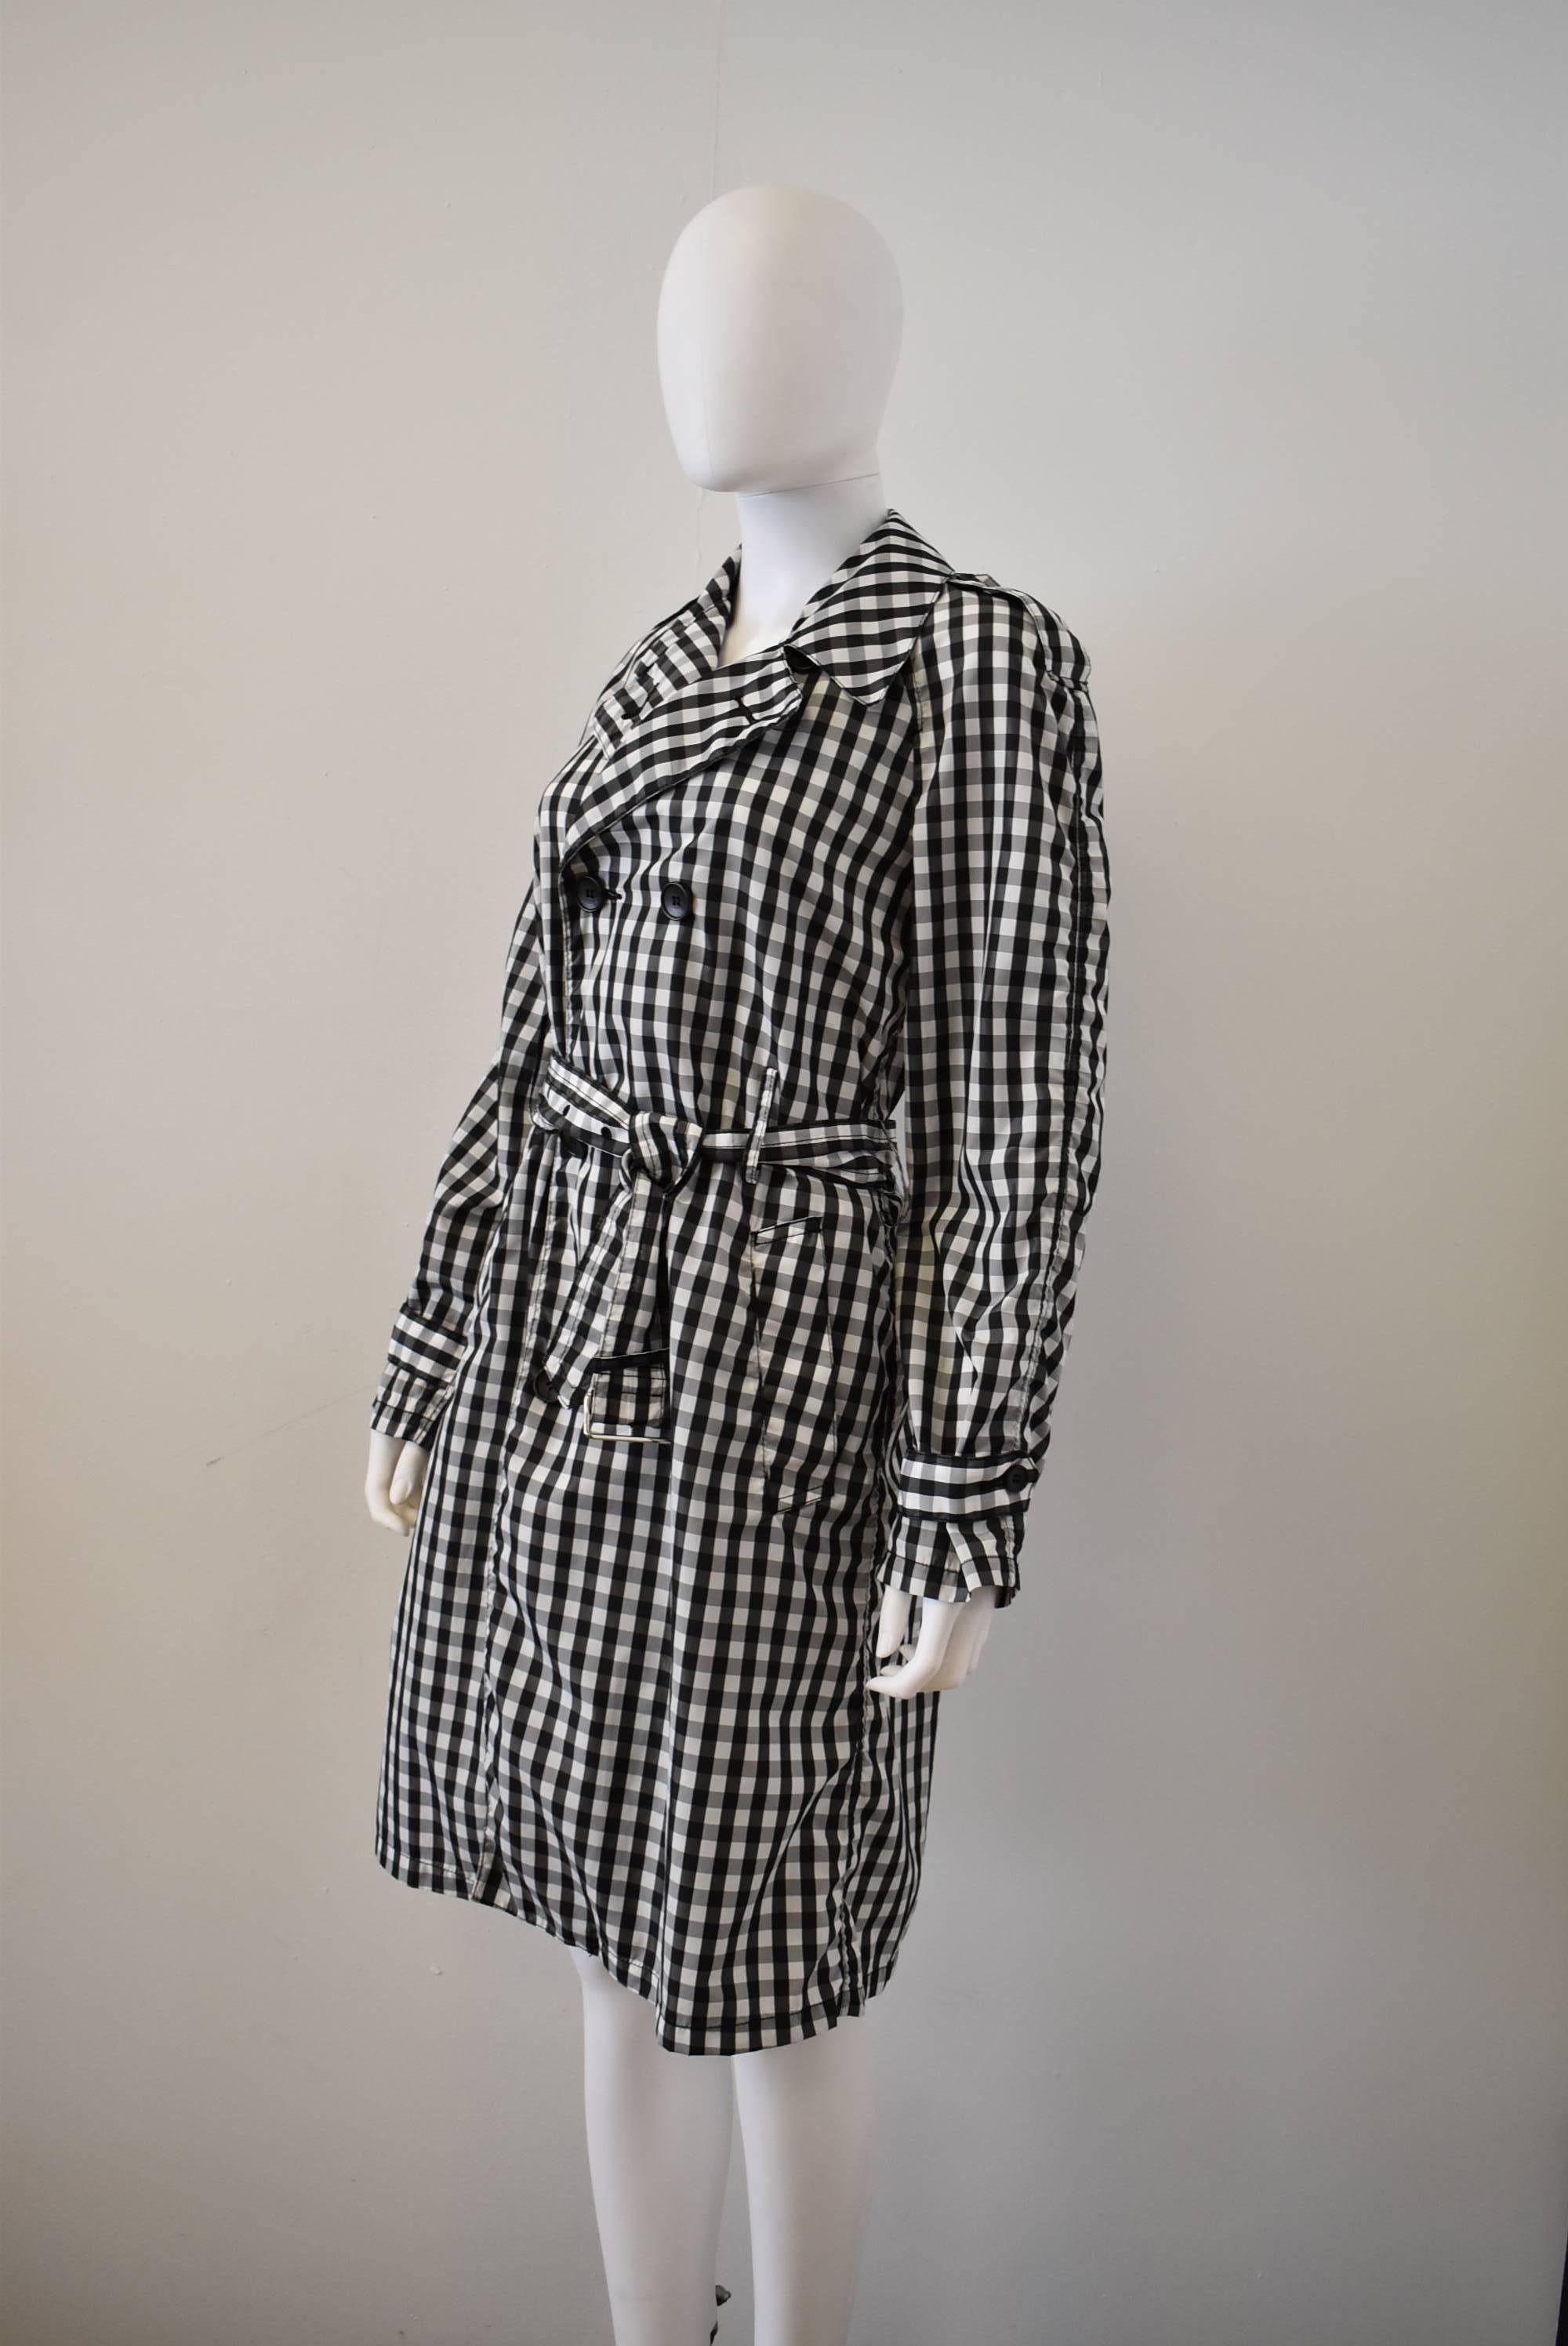 An classic black and white trench check trench coat from Comme des Garcons, with double breasted button fastening, notched collar, pockets and an attached belt around the waist. Year unknown.